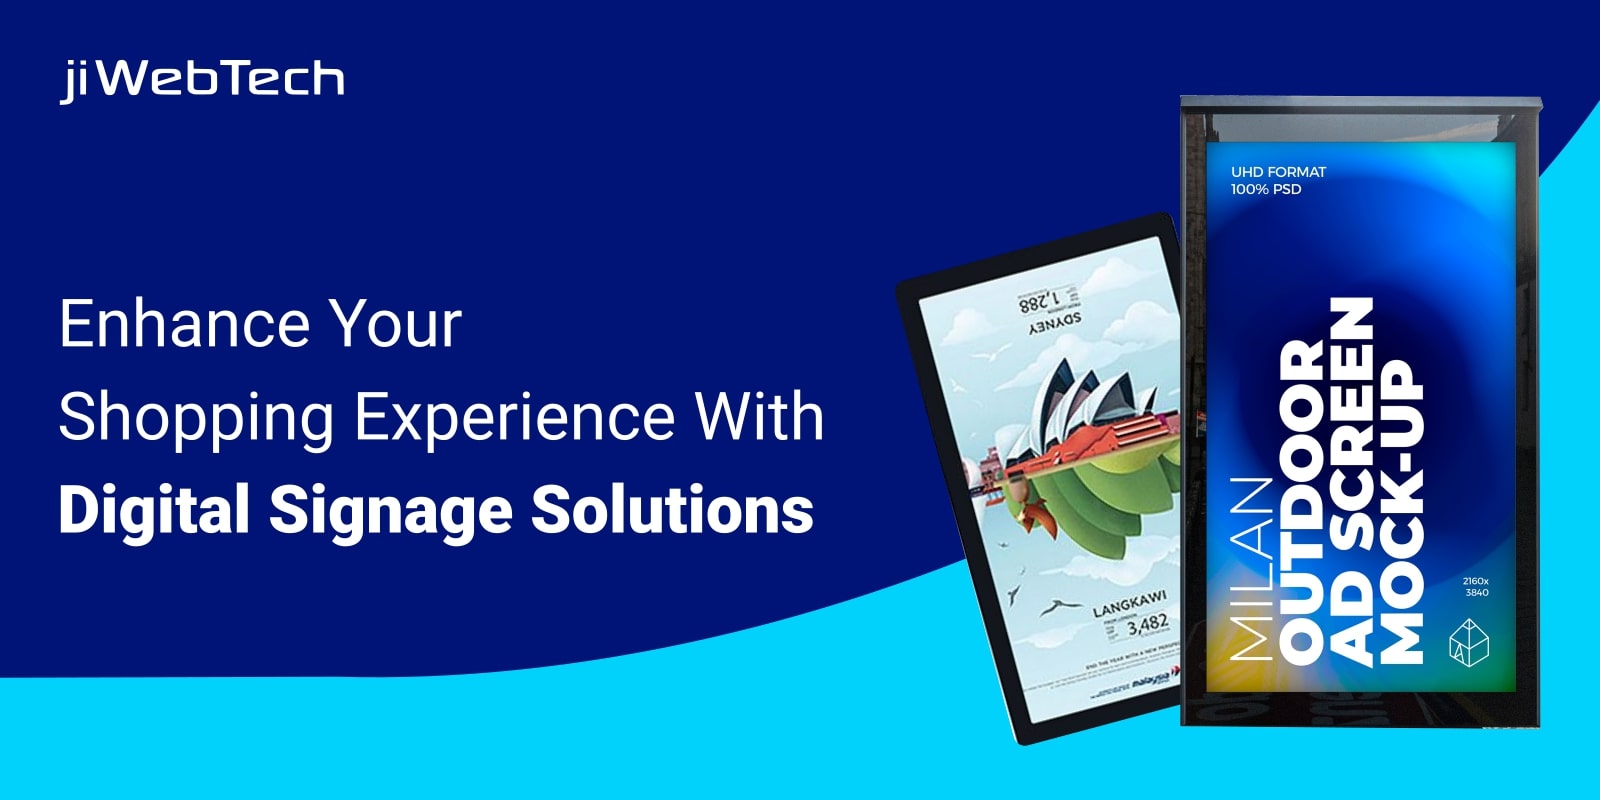 Enhance Your Shopping Experience With Digital Signage Solutions